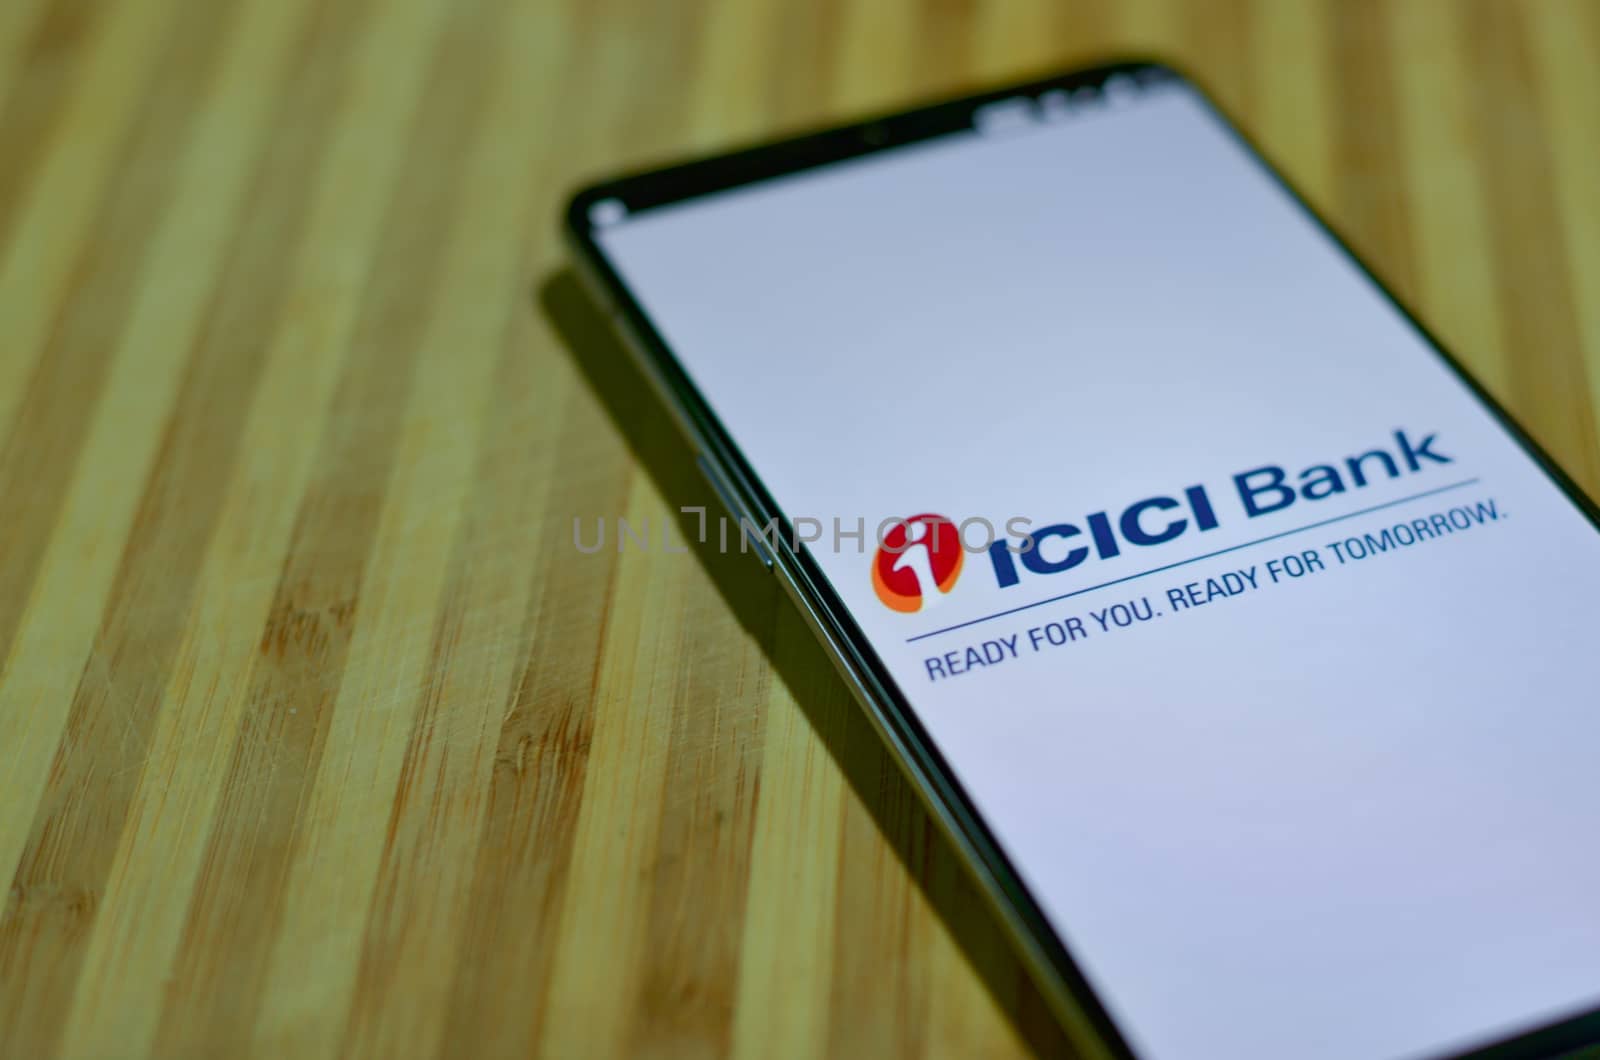 New Delhi, India, 2020. Flat lay ICICI bank app on mobile phone screen against a wooden board background. People are encouraged to not visit the bank & do digital banking transactions during lock down